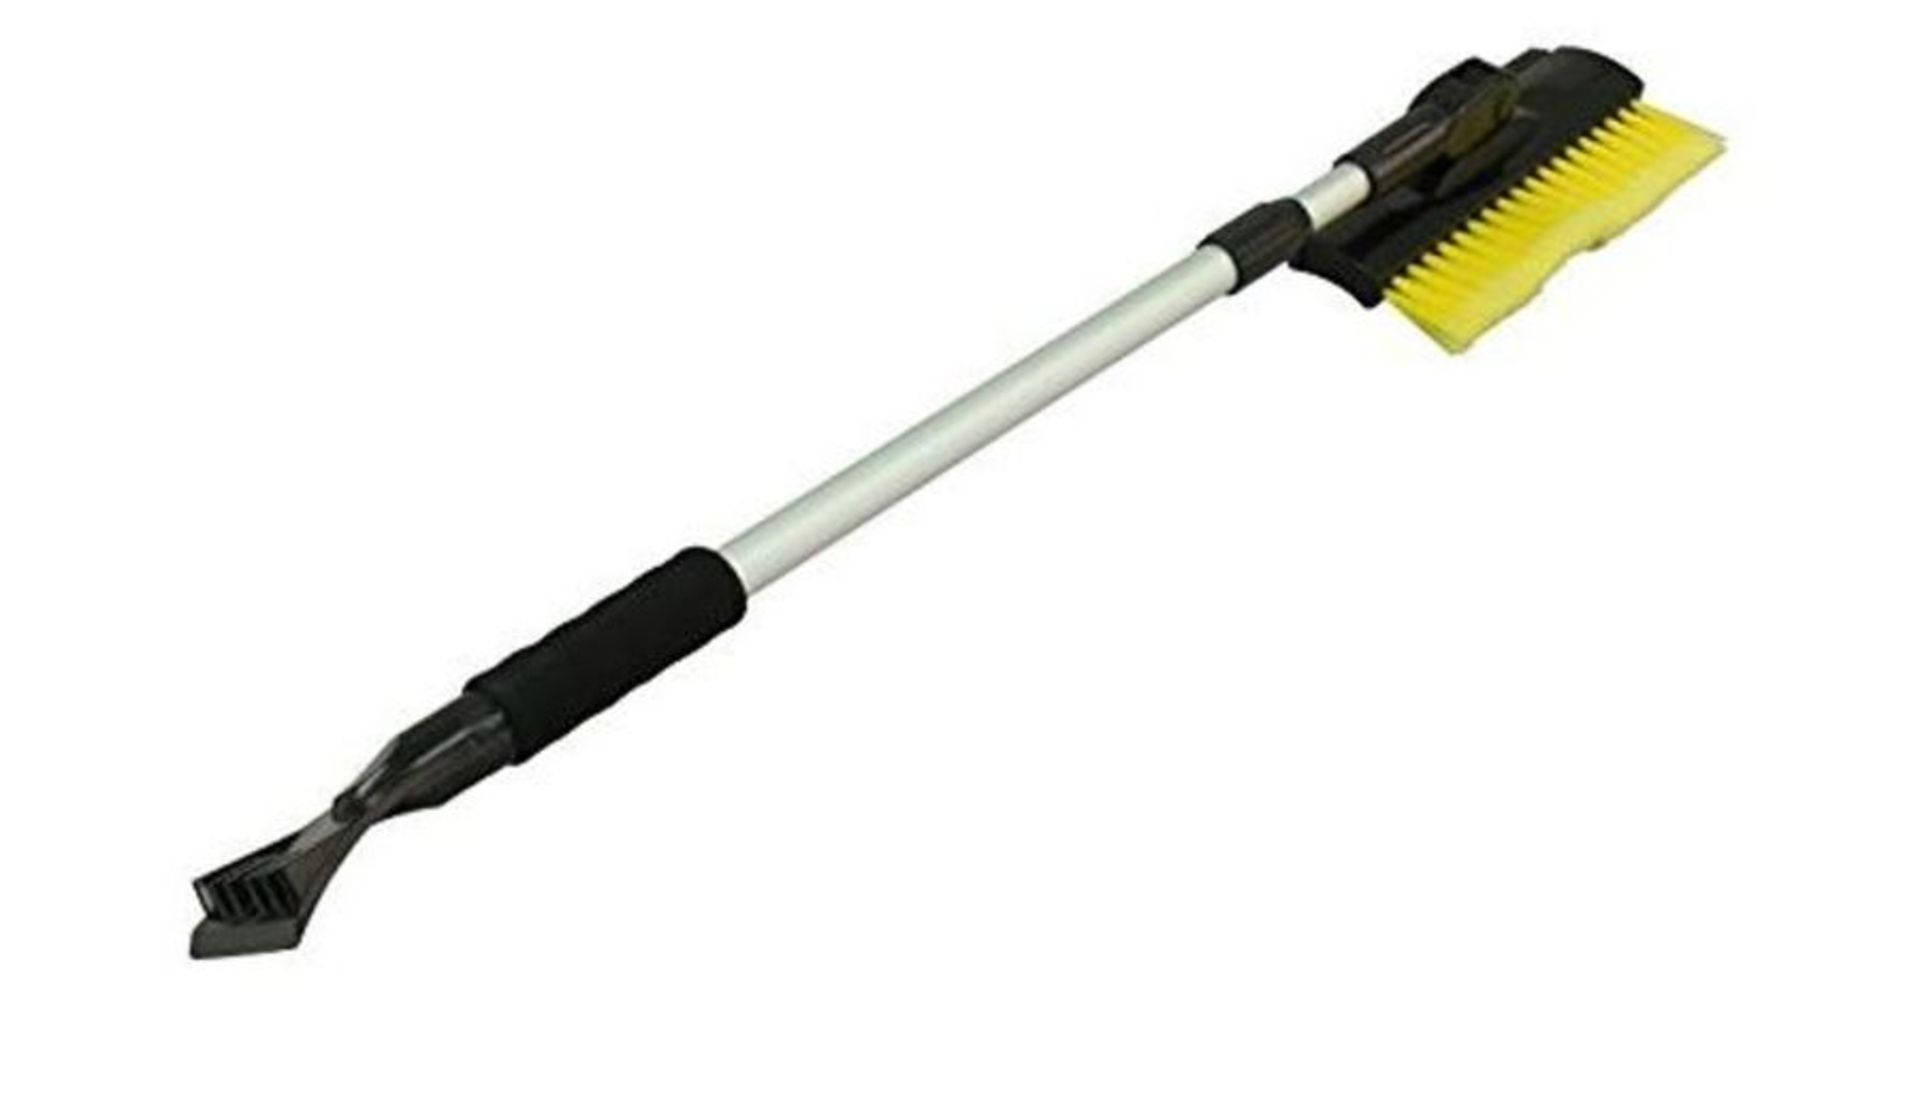 11 X ROLSON'S 3-IN-1 HEAVY DUTY SNOW BRUSHES / AS NEW